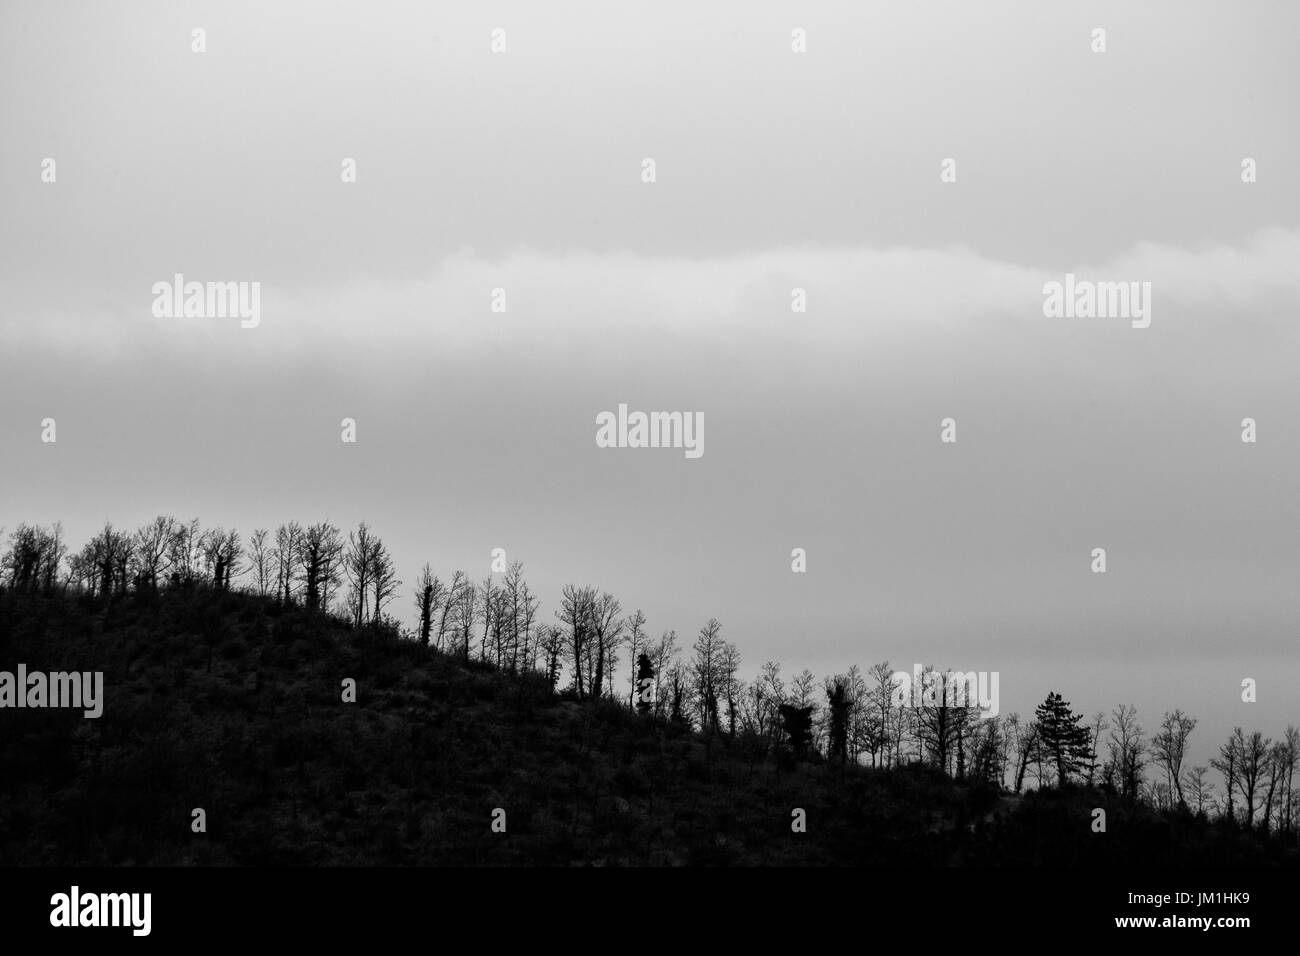 A line of trees following the curvy profile of a hill Stock Photo